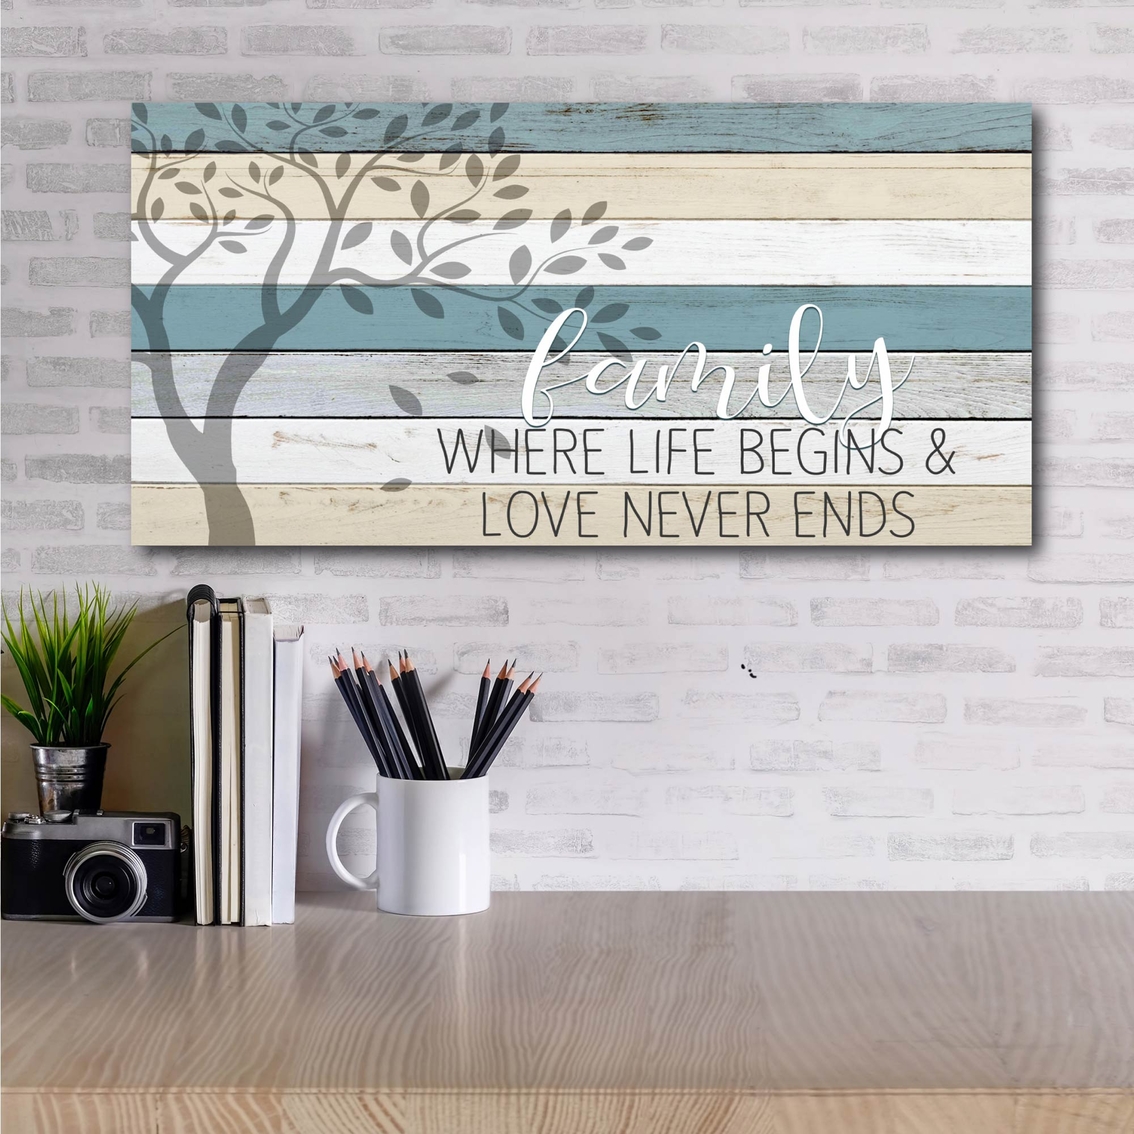 Courtside Market Family Where Life Begins Canvas Wall Art - Image 2 of 2